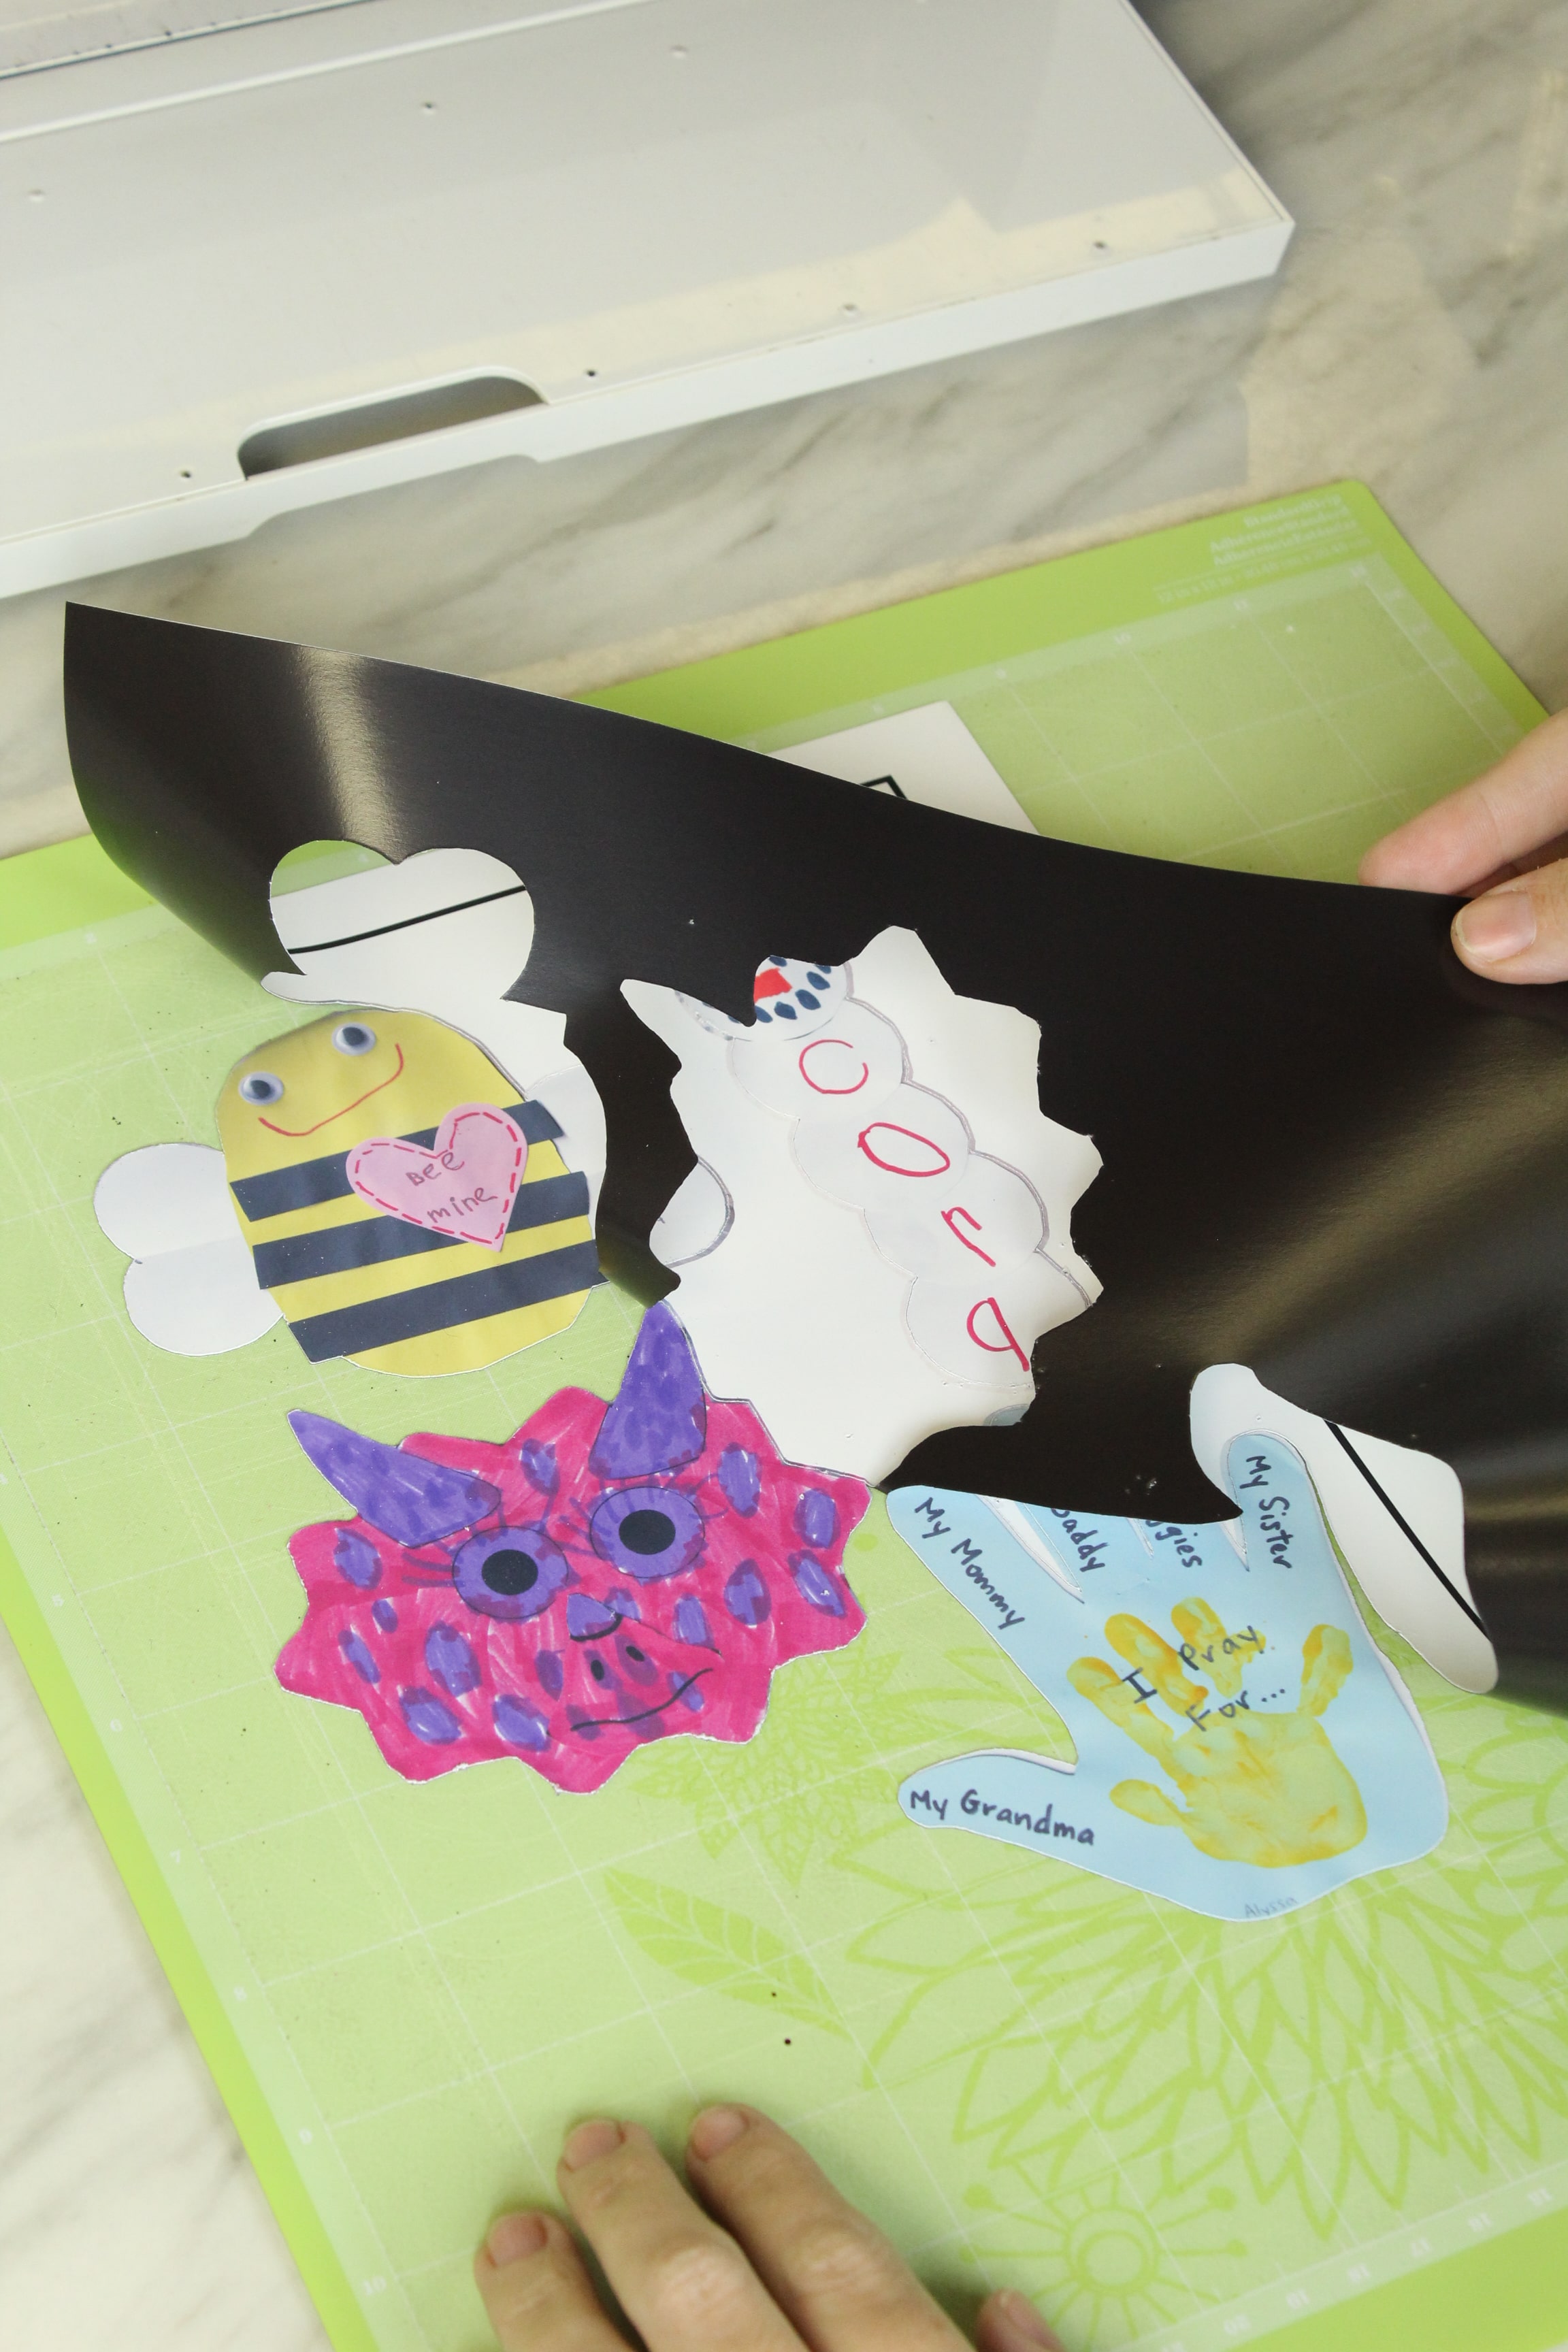 Turn your little one's artwork into magnets! You wont' want to miss this DIY!